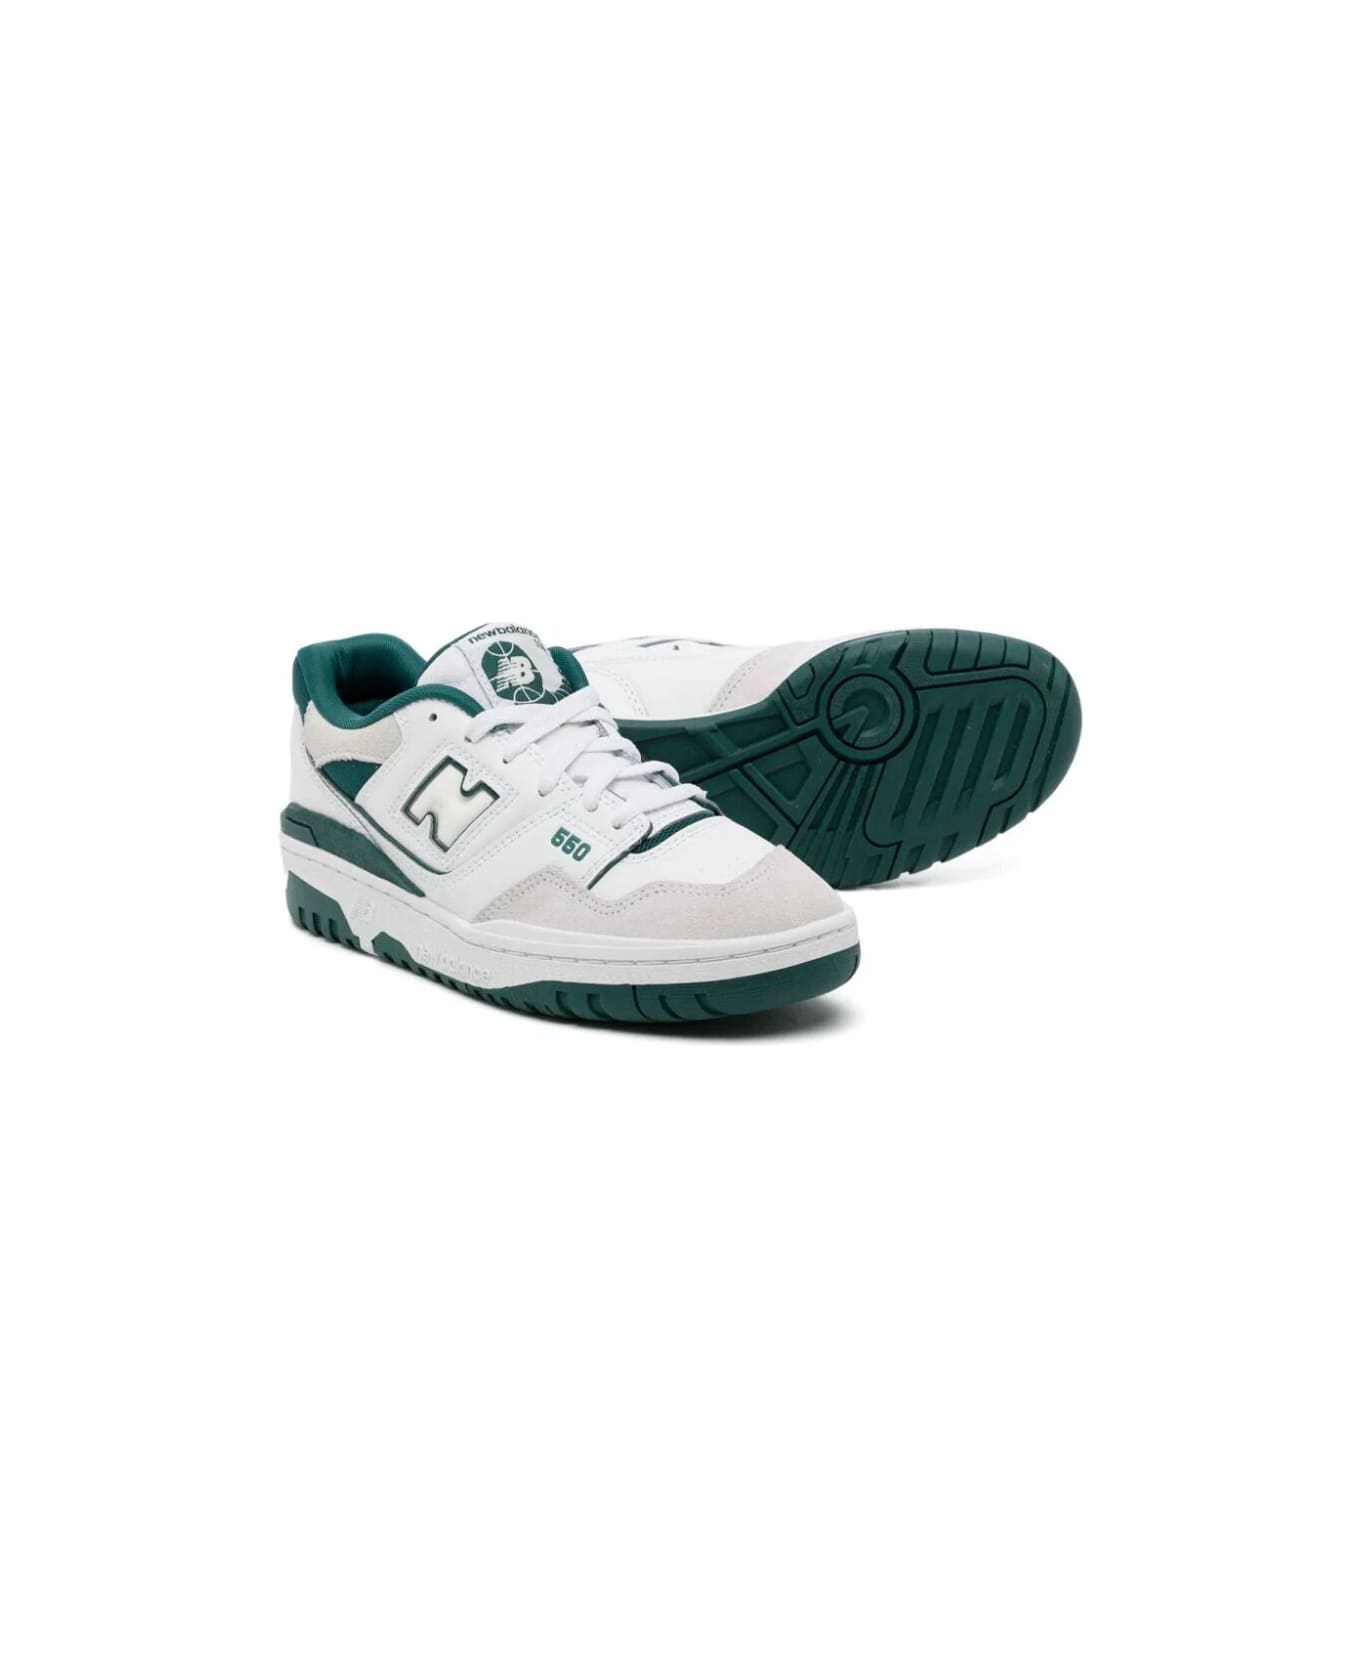 New Balance 550 Sneakers - White Green